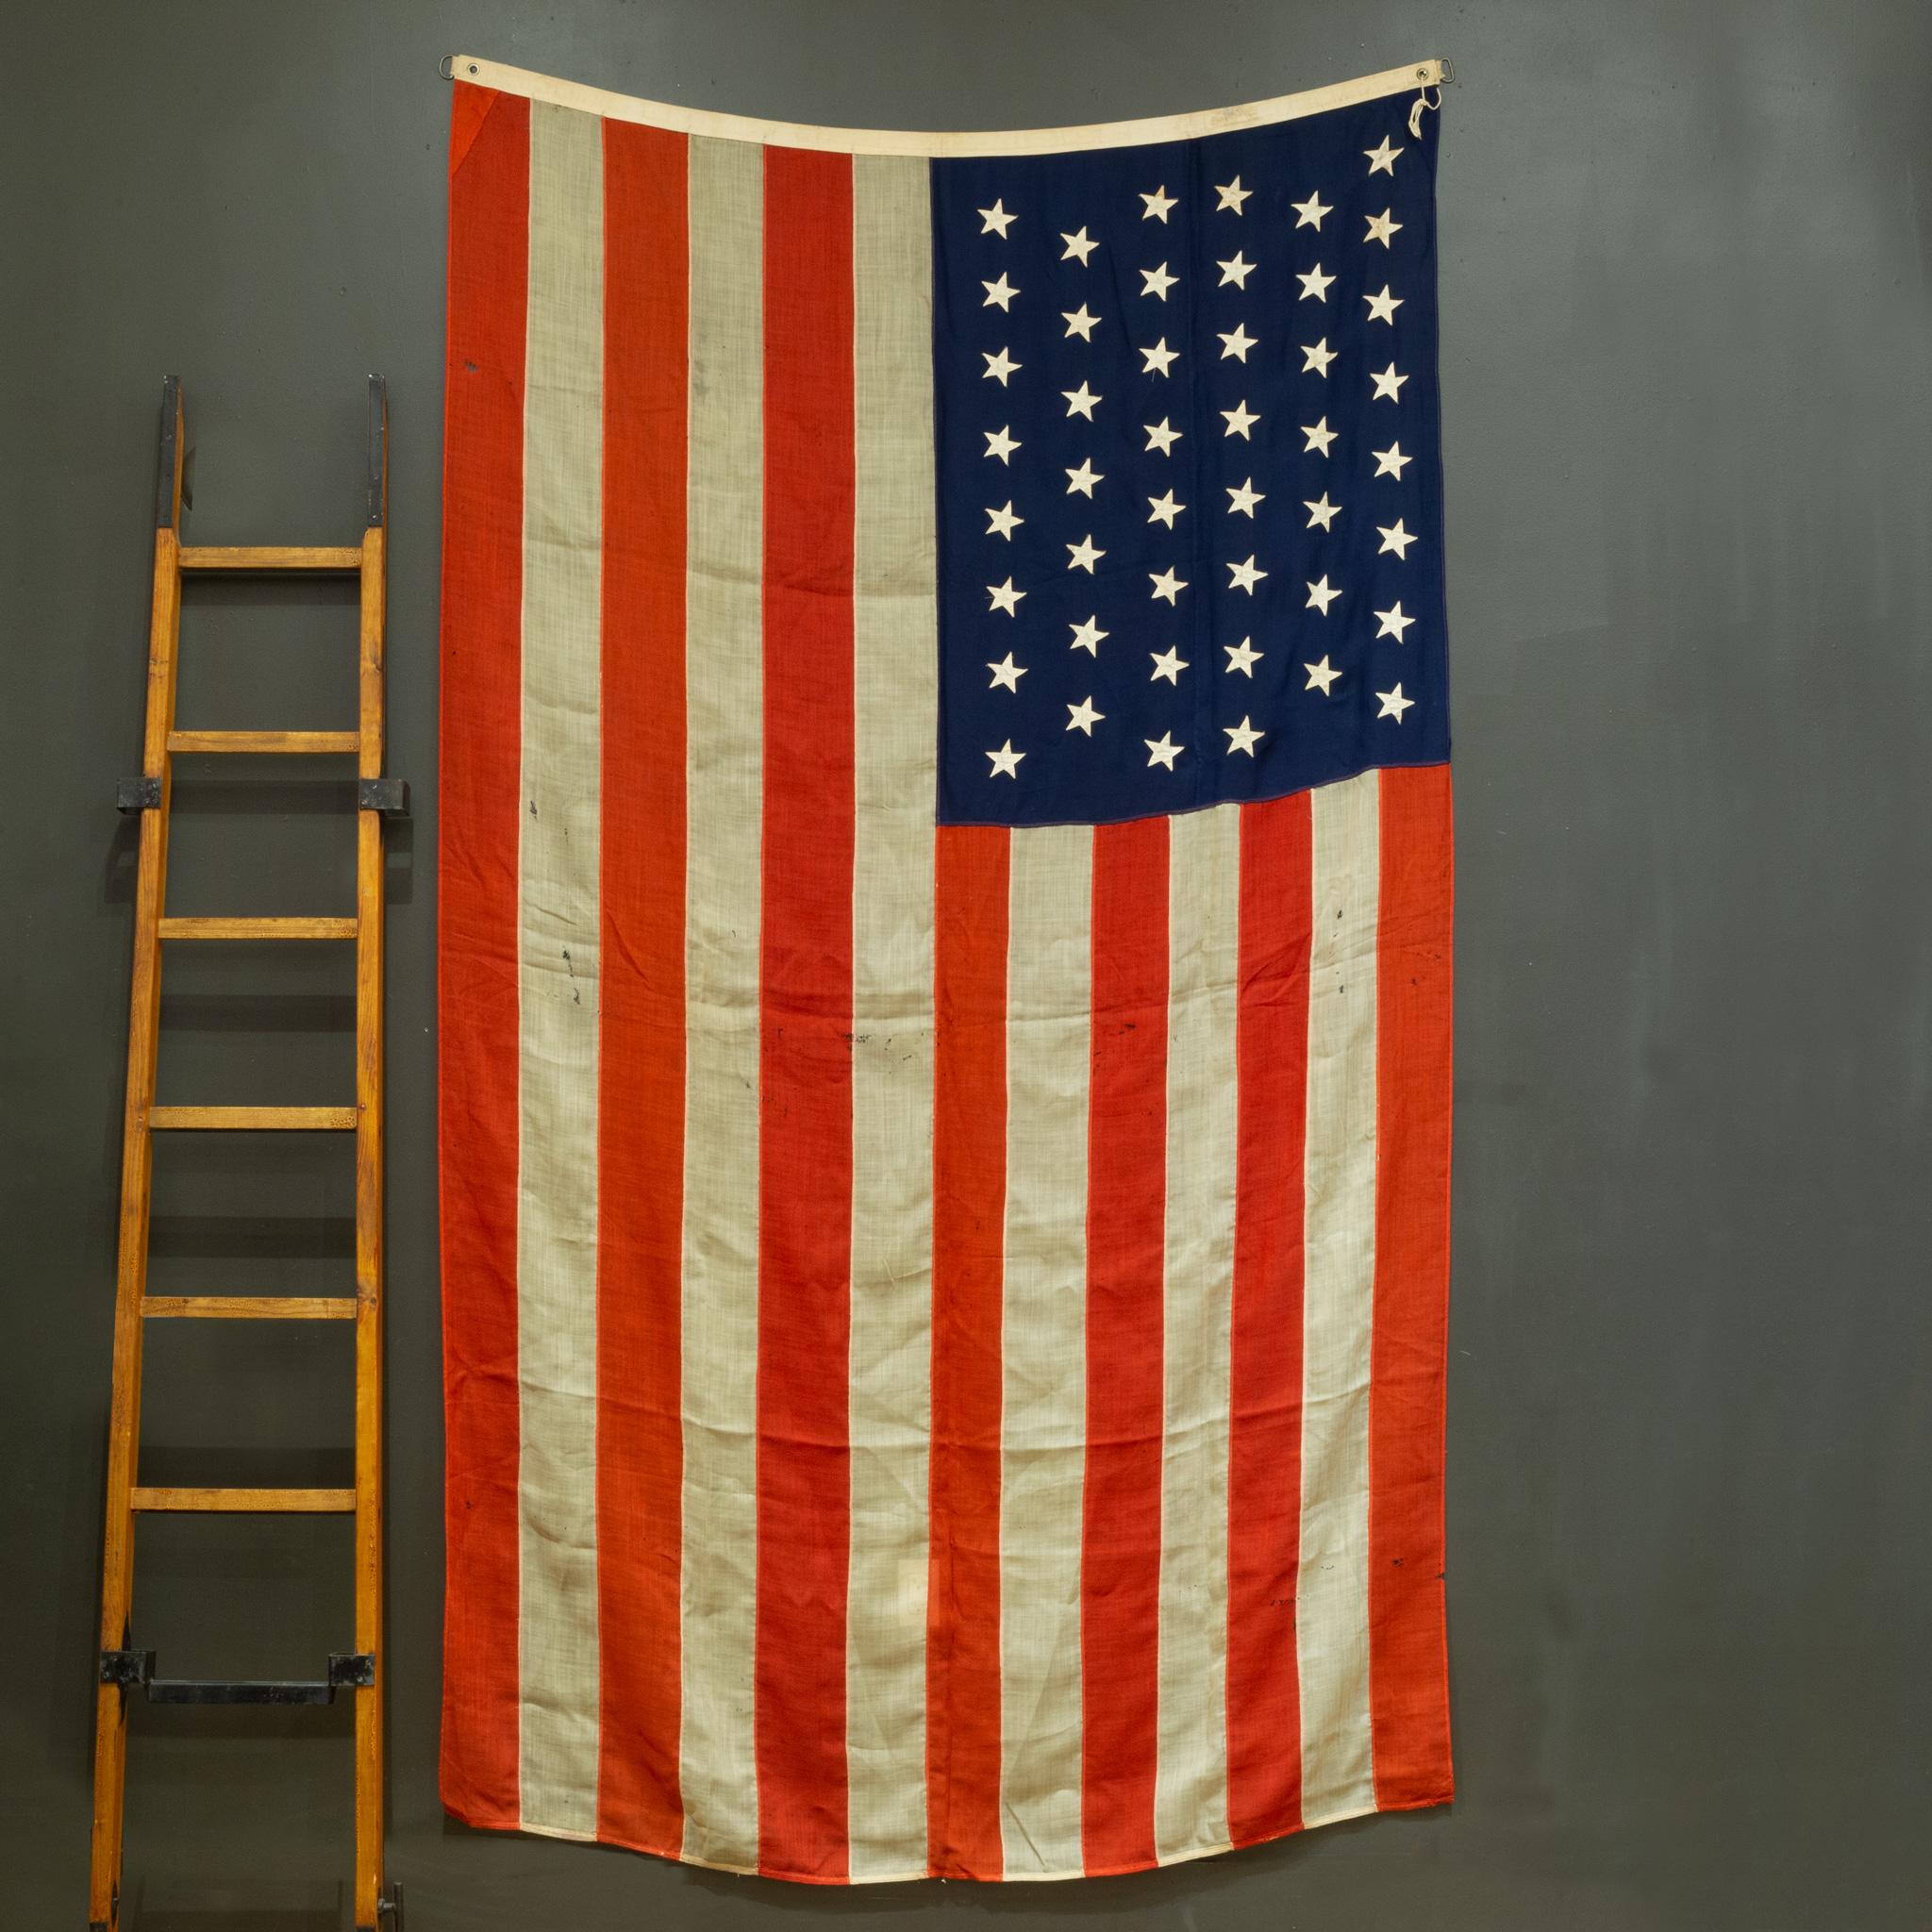 ABOUT

A monumental linen American flag with 48 stars, metal grommets and metal rings.

    CREATOR Double Wrap.
    DATE OF MANUFACTURE c.1940-1950.
    MATERIALS AND TECHNIQUES Linen, Metal.
    CONDITION Good. Wear consistent with age and use.